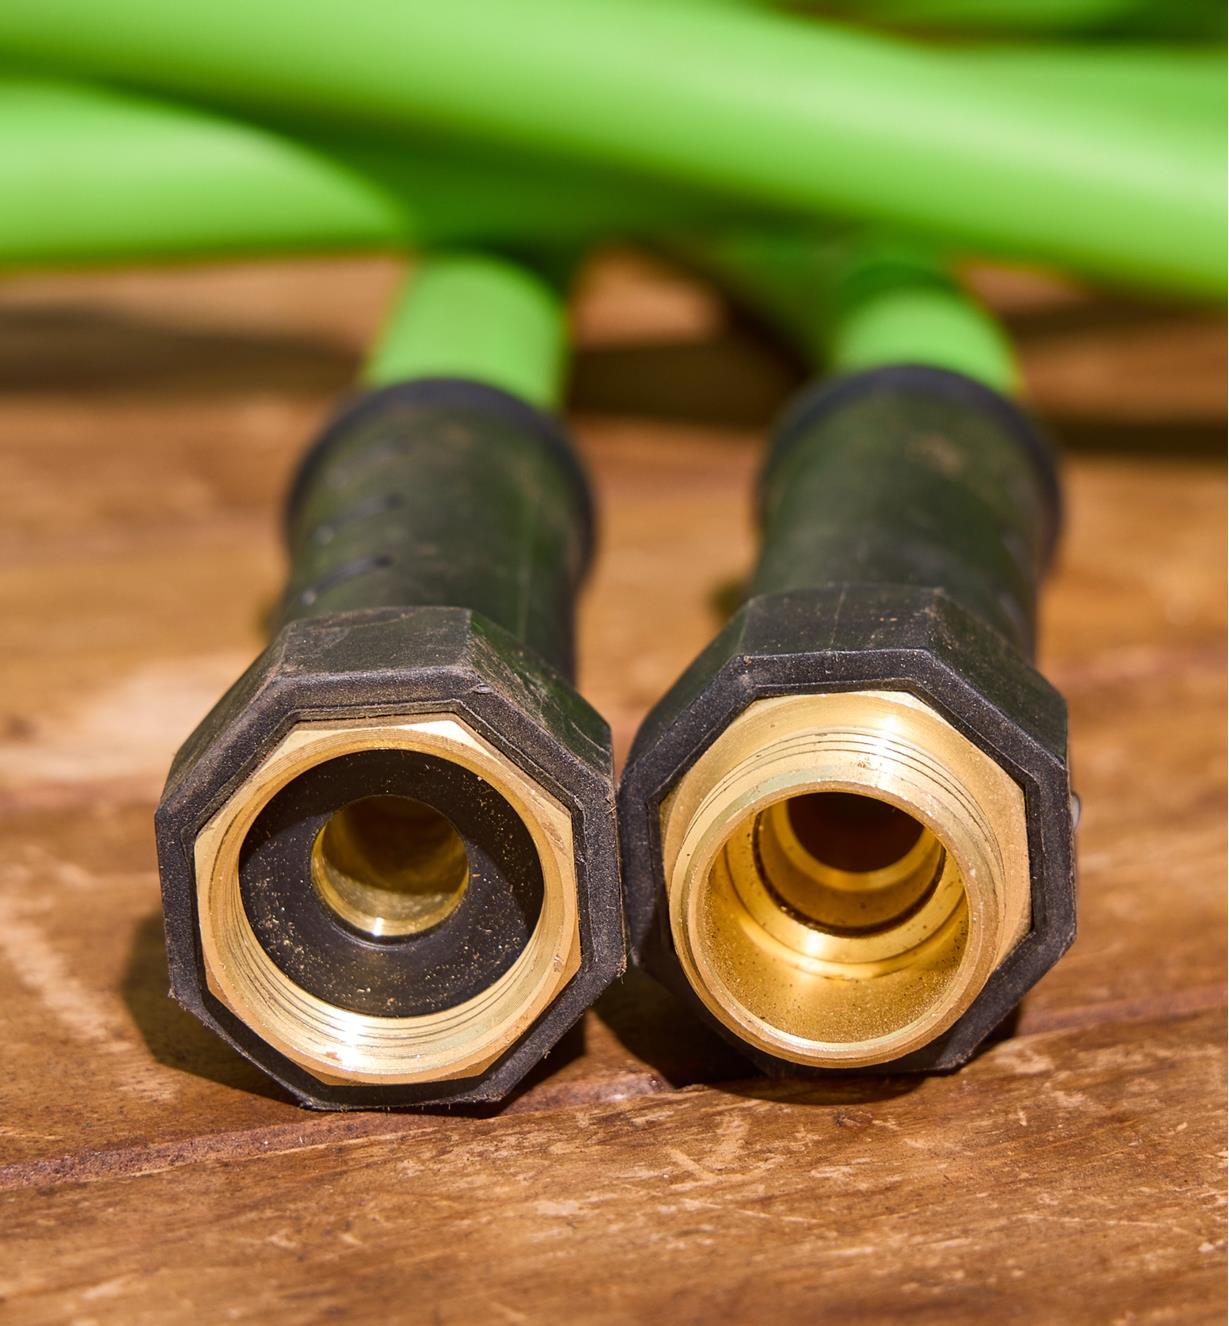 The ends of the hose with plastic swivel collars and brass fittings